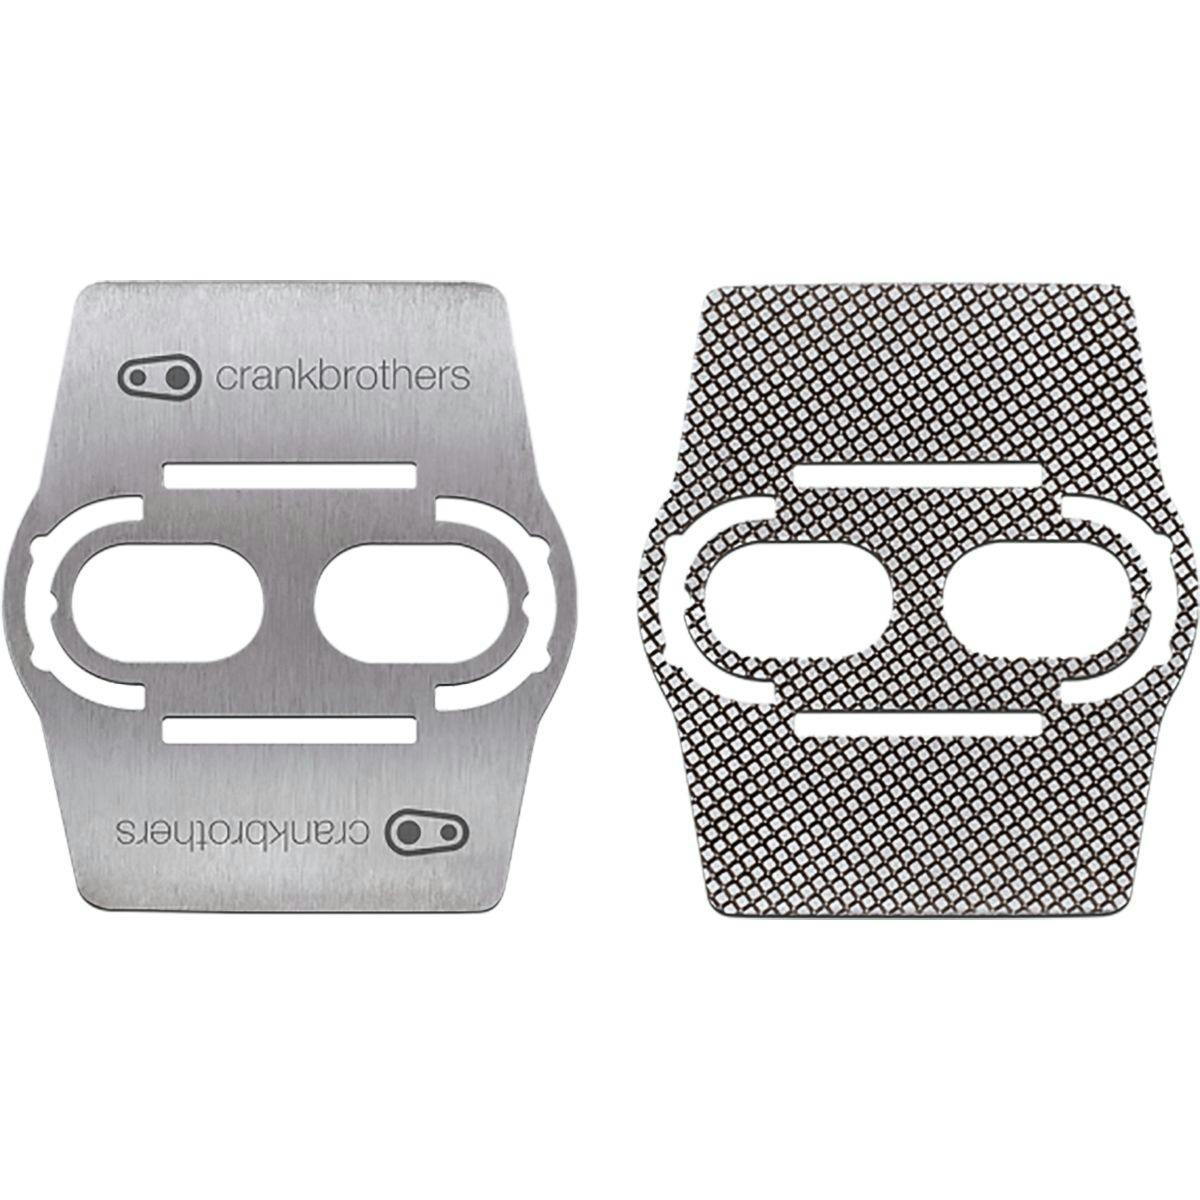 Crank Brothers Shoe Shields · Silver · One Size